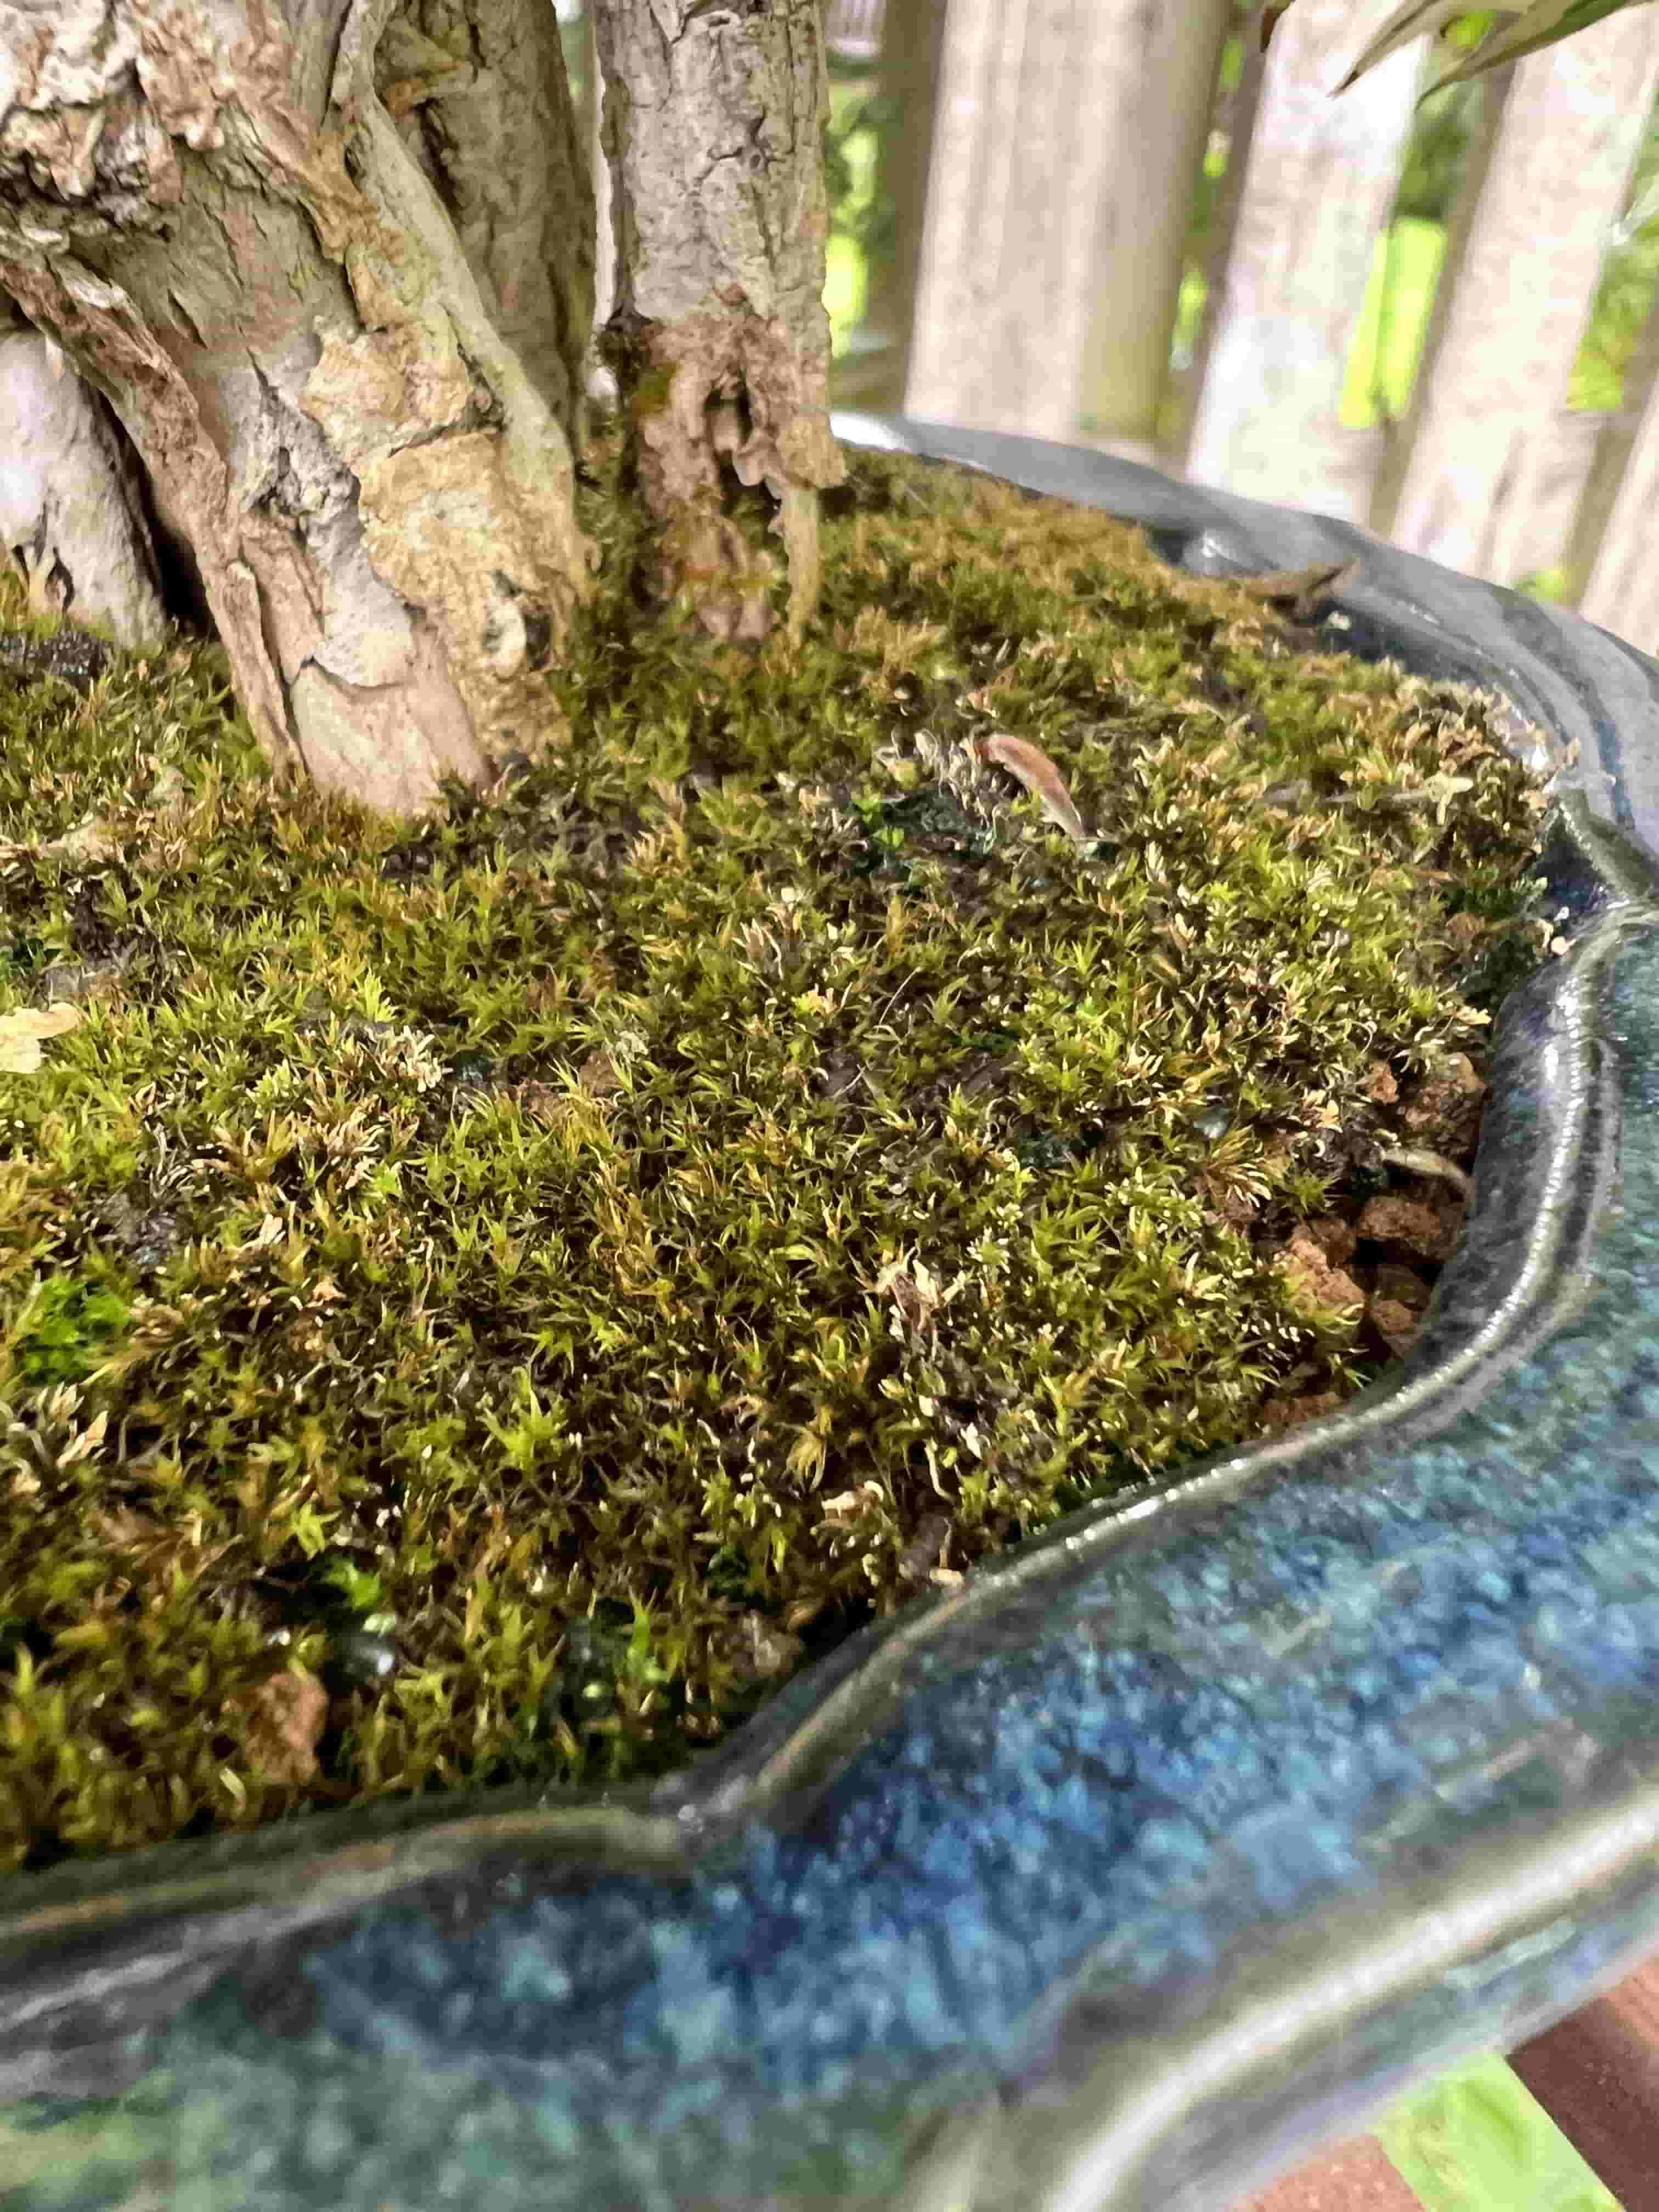 How to Take Care of Moss